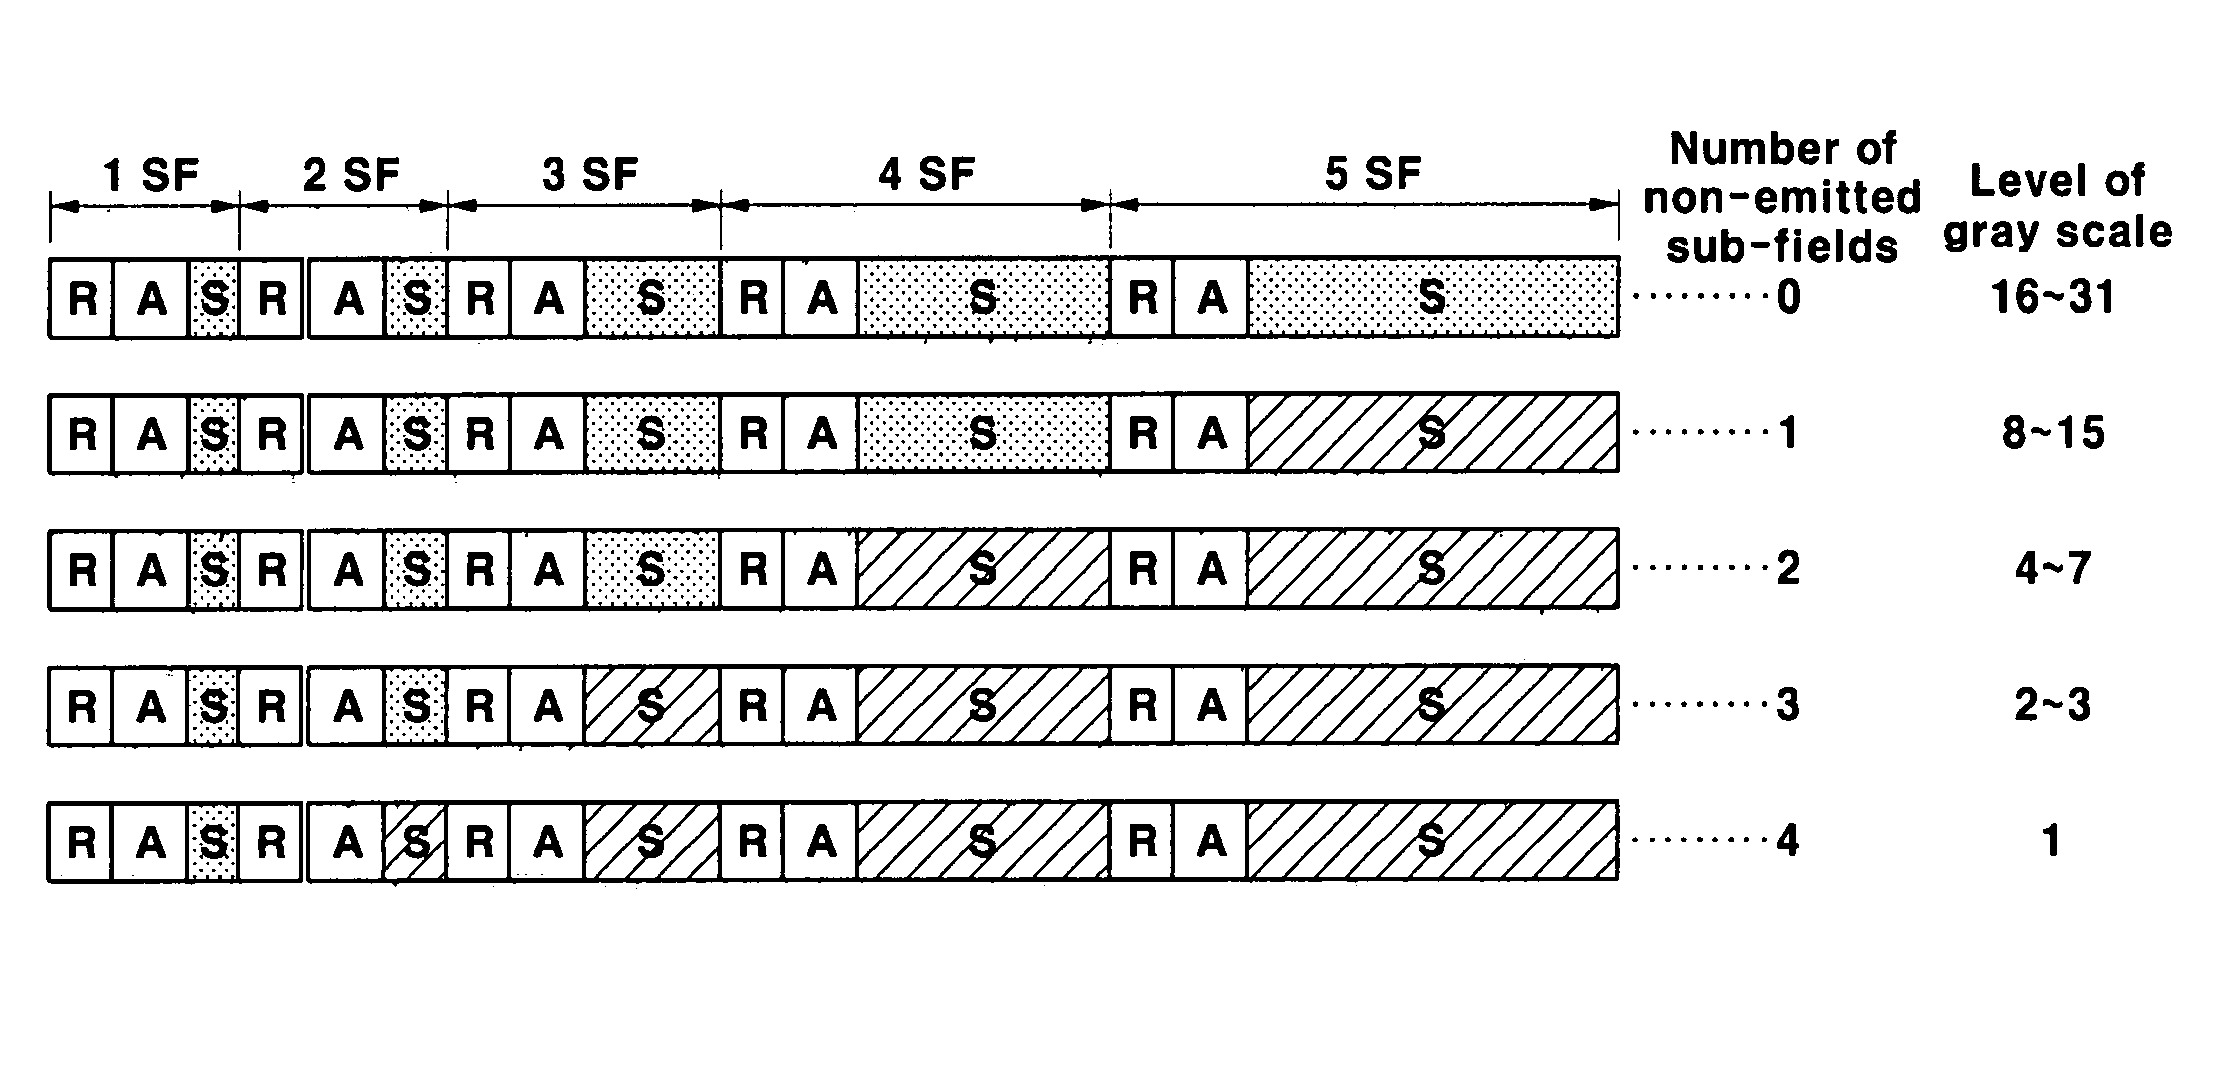 Plasma display panel having a driving apparatus and method for displaying pictures